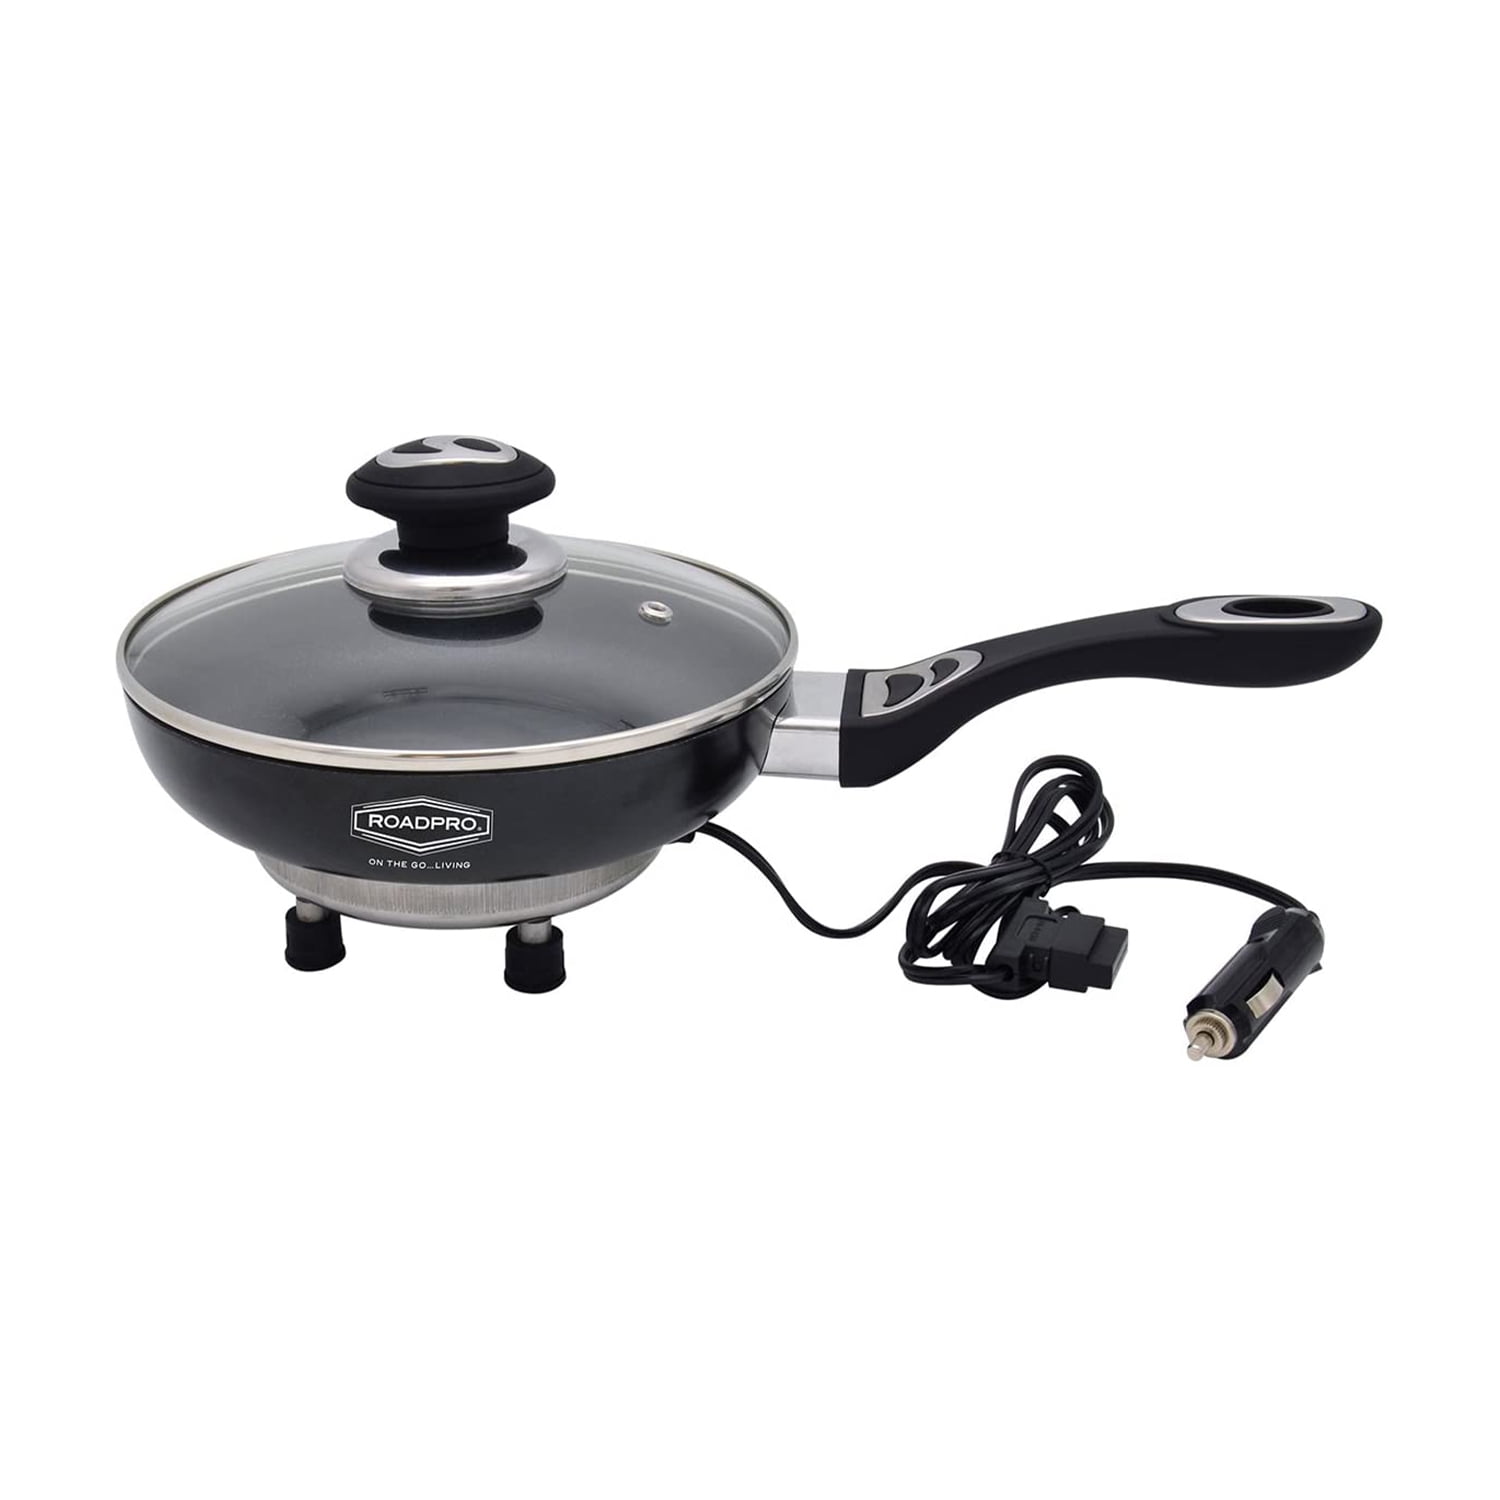 Rpfp335ns 12v Portable Frying Pan With Non-stick Surface